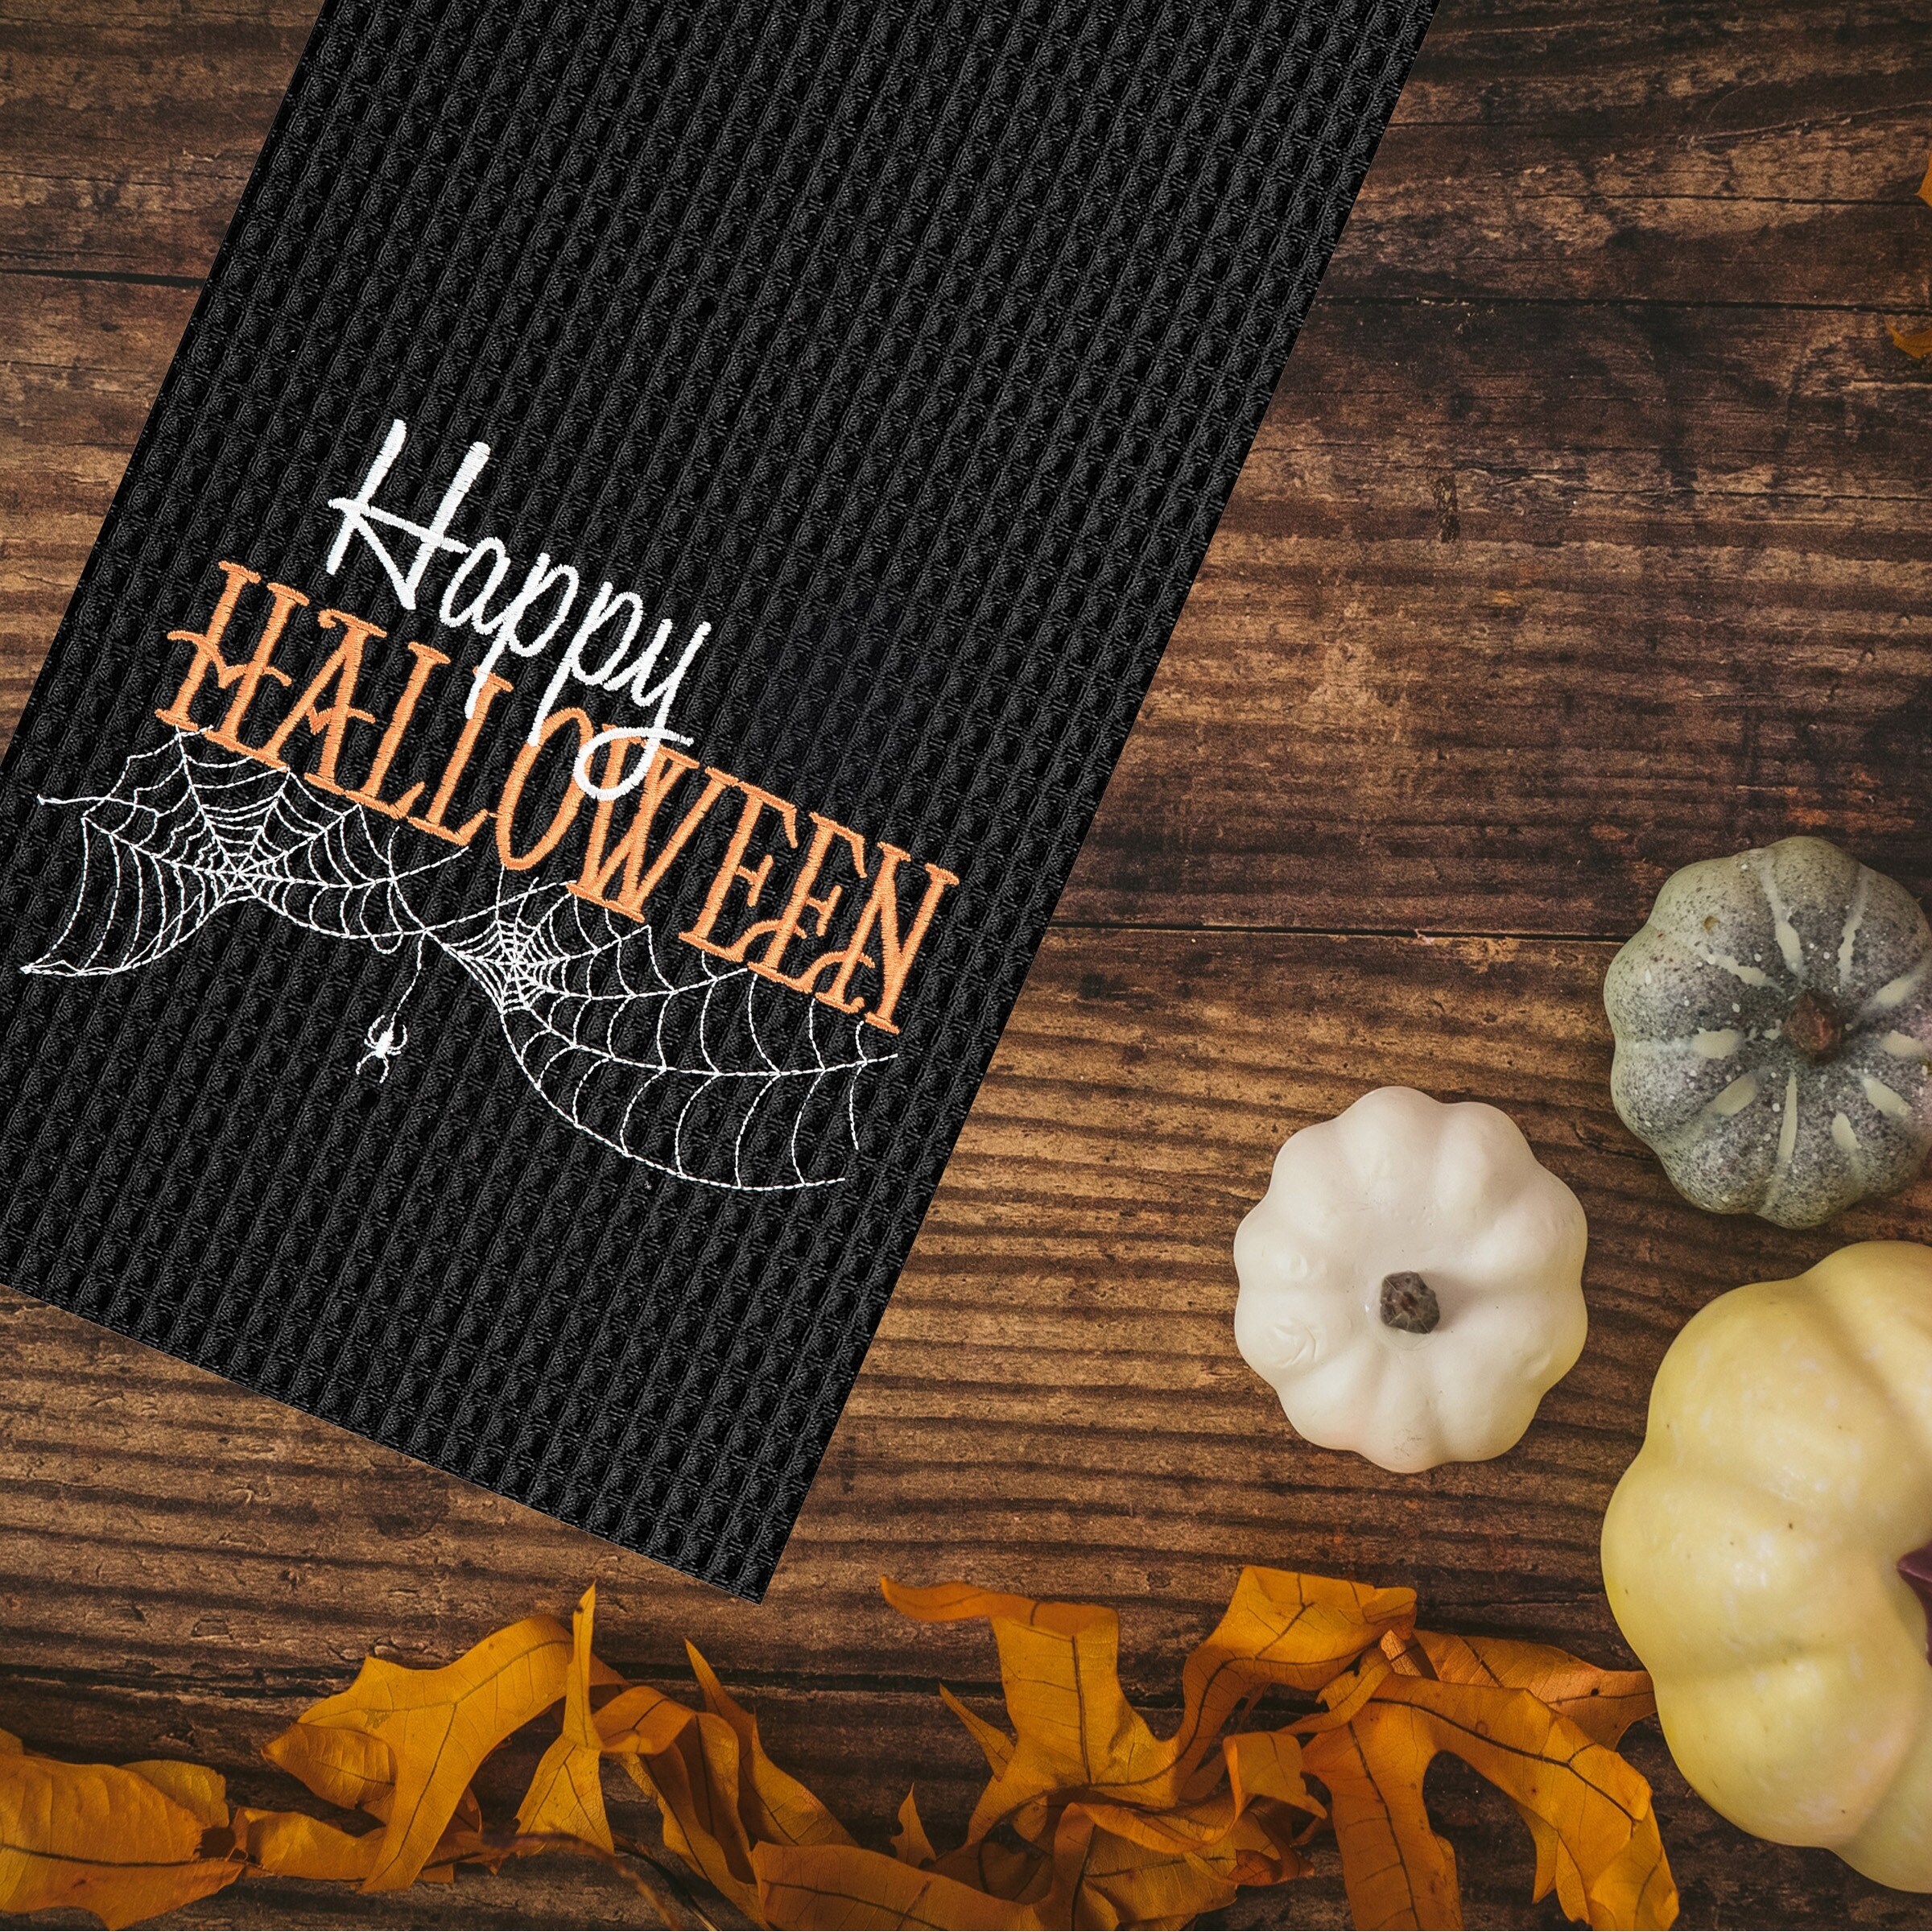 https://ak1.ostkcdn.com/images/products/is/images/direct/4f049211c2575be023b7499151930026b878442d/Happy-Halloween-Waffle-Weave-Kitchen-Towel.jpg